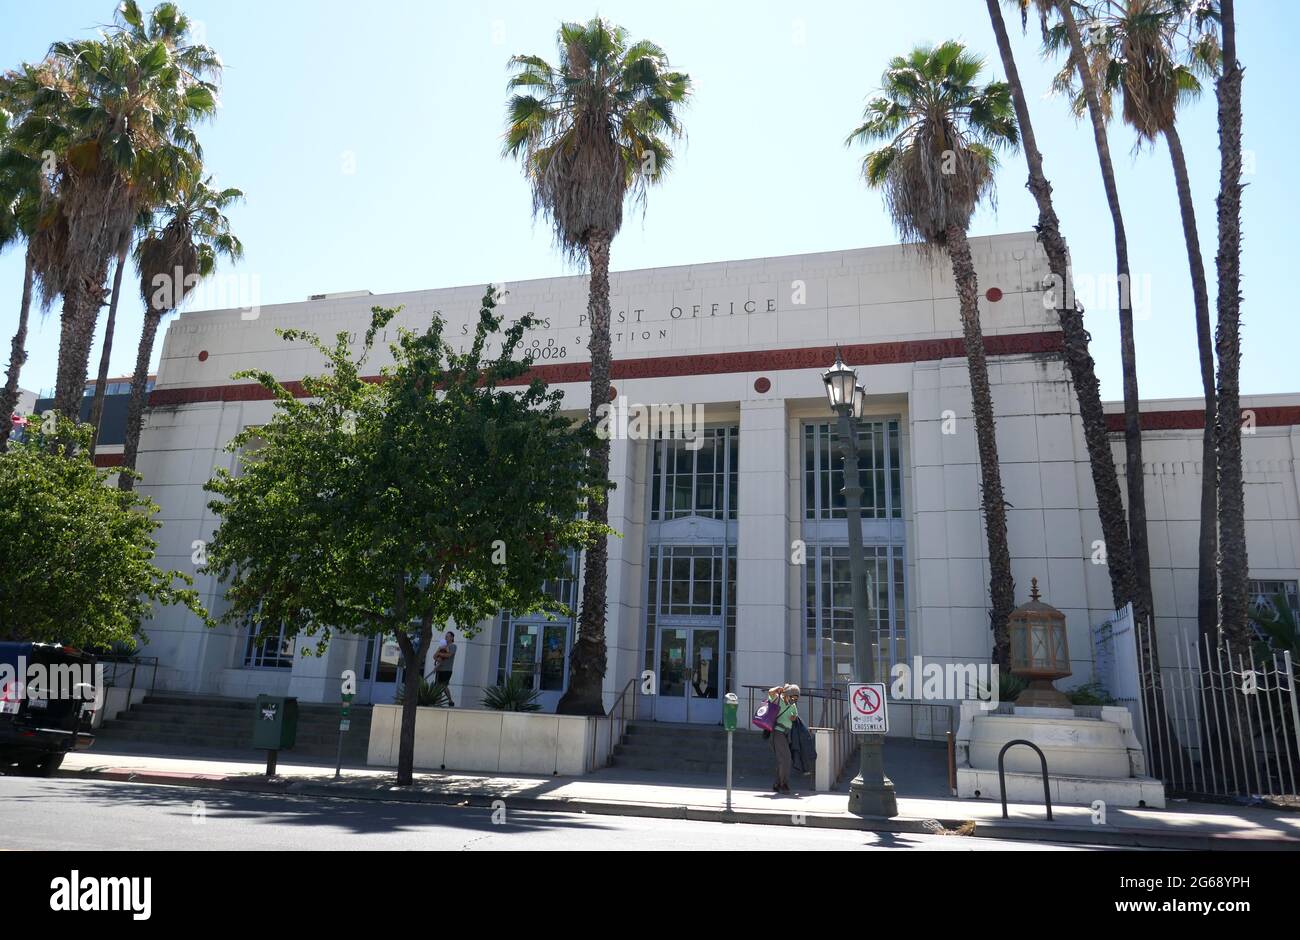 Los Angeles, California, USA 3rd July 2021 A general view of atmosphere of US Post Office in Hollywood where cinematographer King David Gray, Lon Chaney Collaborator was killed in an unsolved murder here at 1615 Wilcox Avenue on July 3, 2021 in Los Angeles, California, USA. Photo by Barry King/Alamy Stock Photo Stock Photo